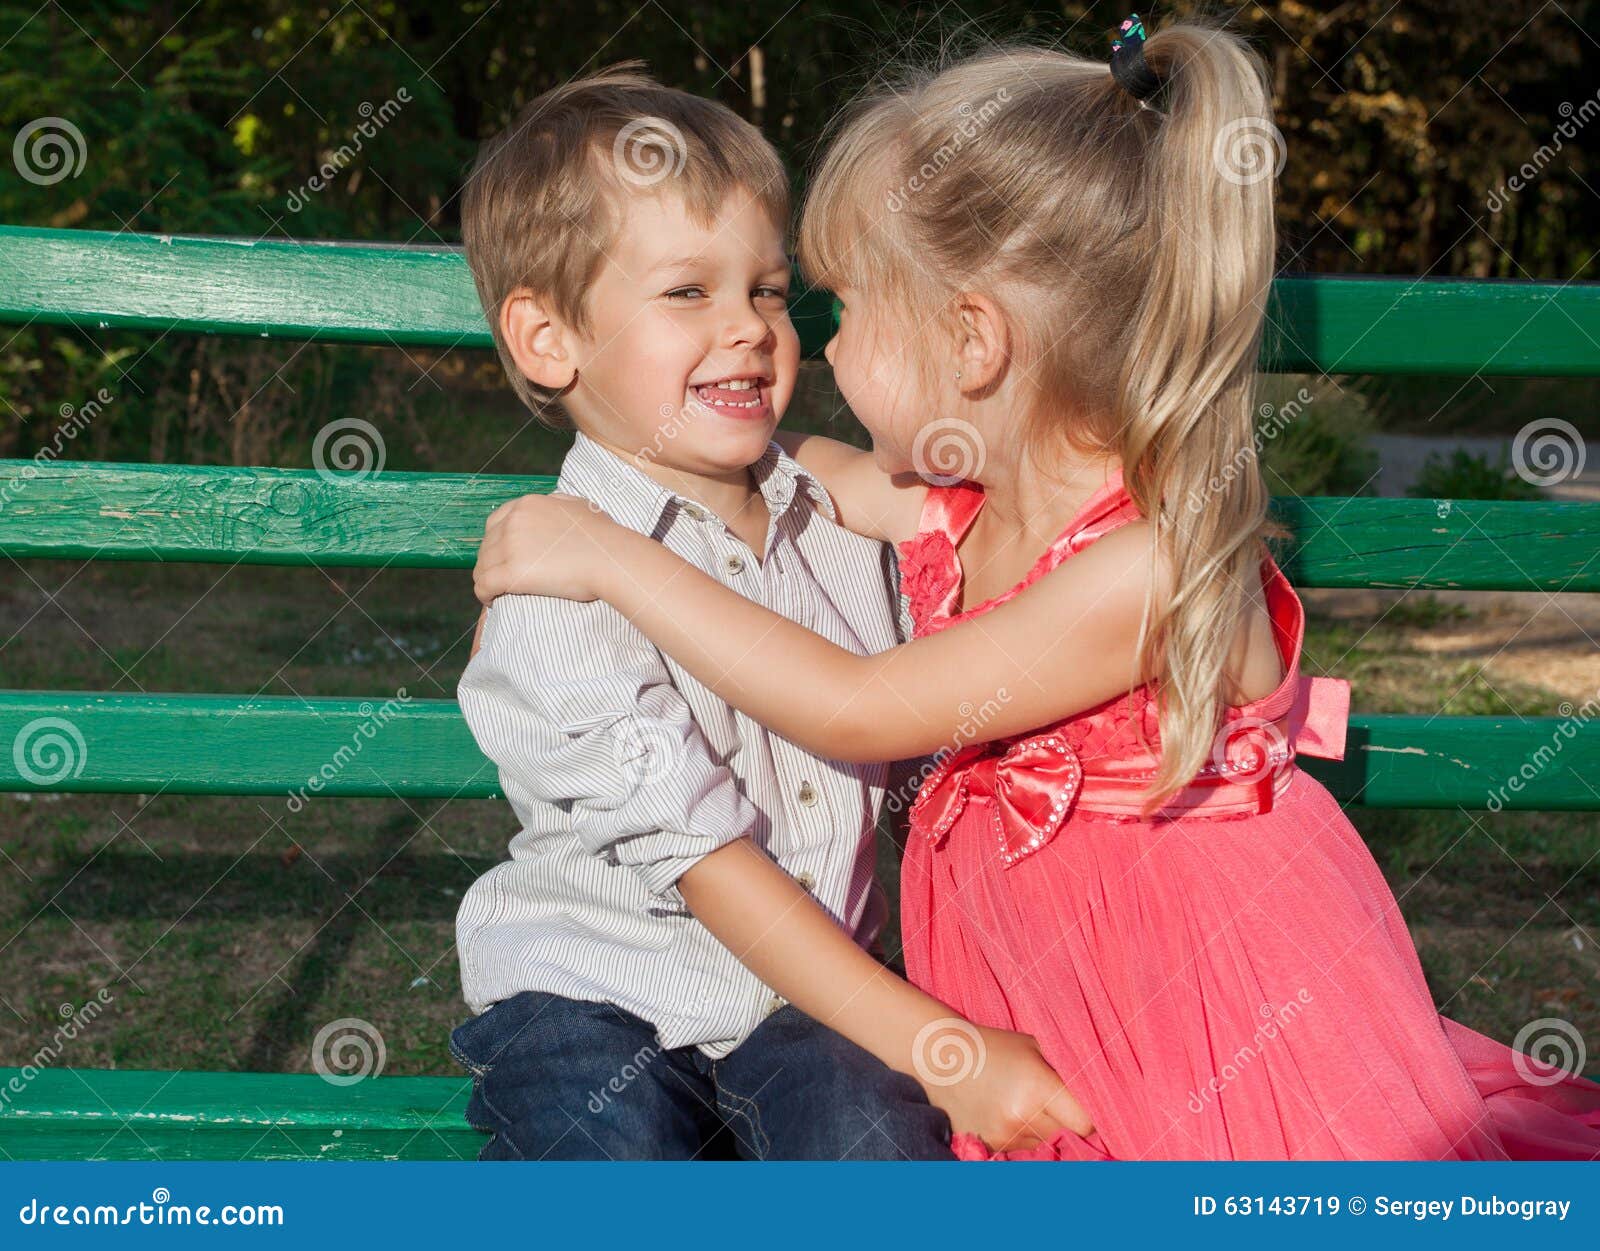 169 Child Taboo Stock Photos, Images & Pictures